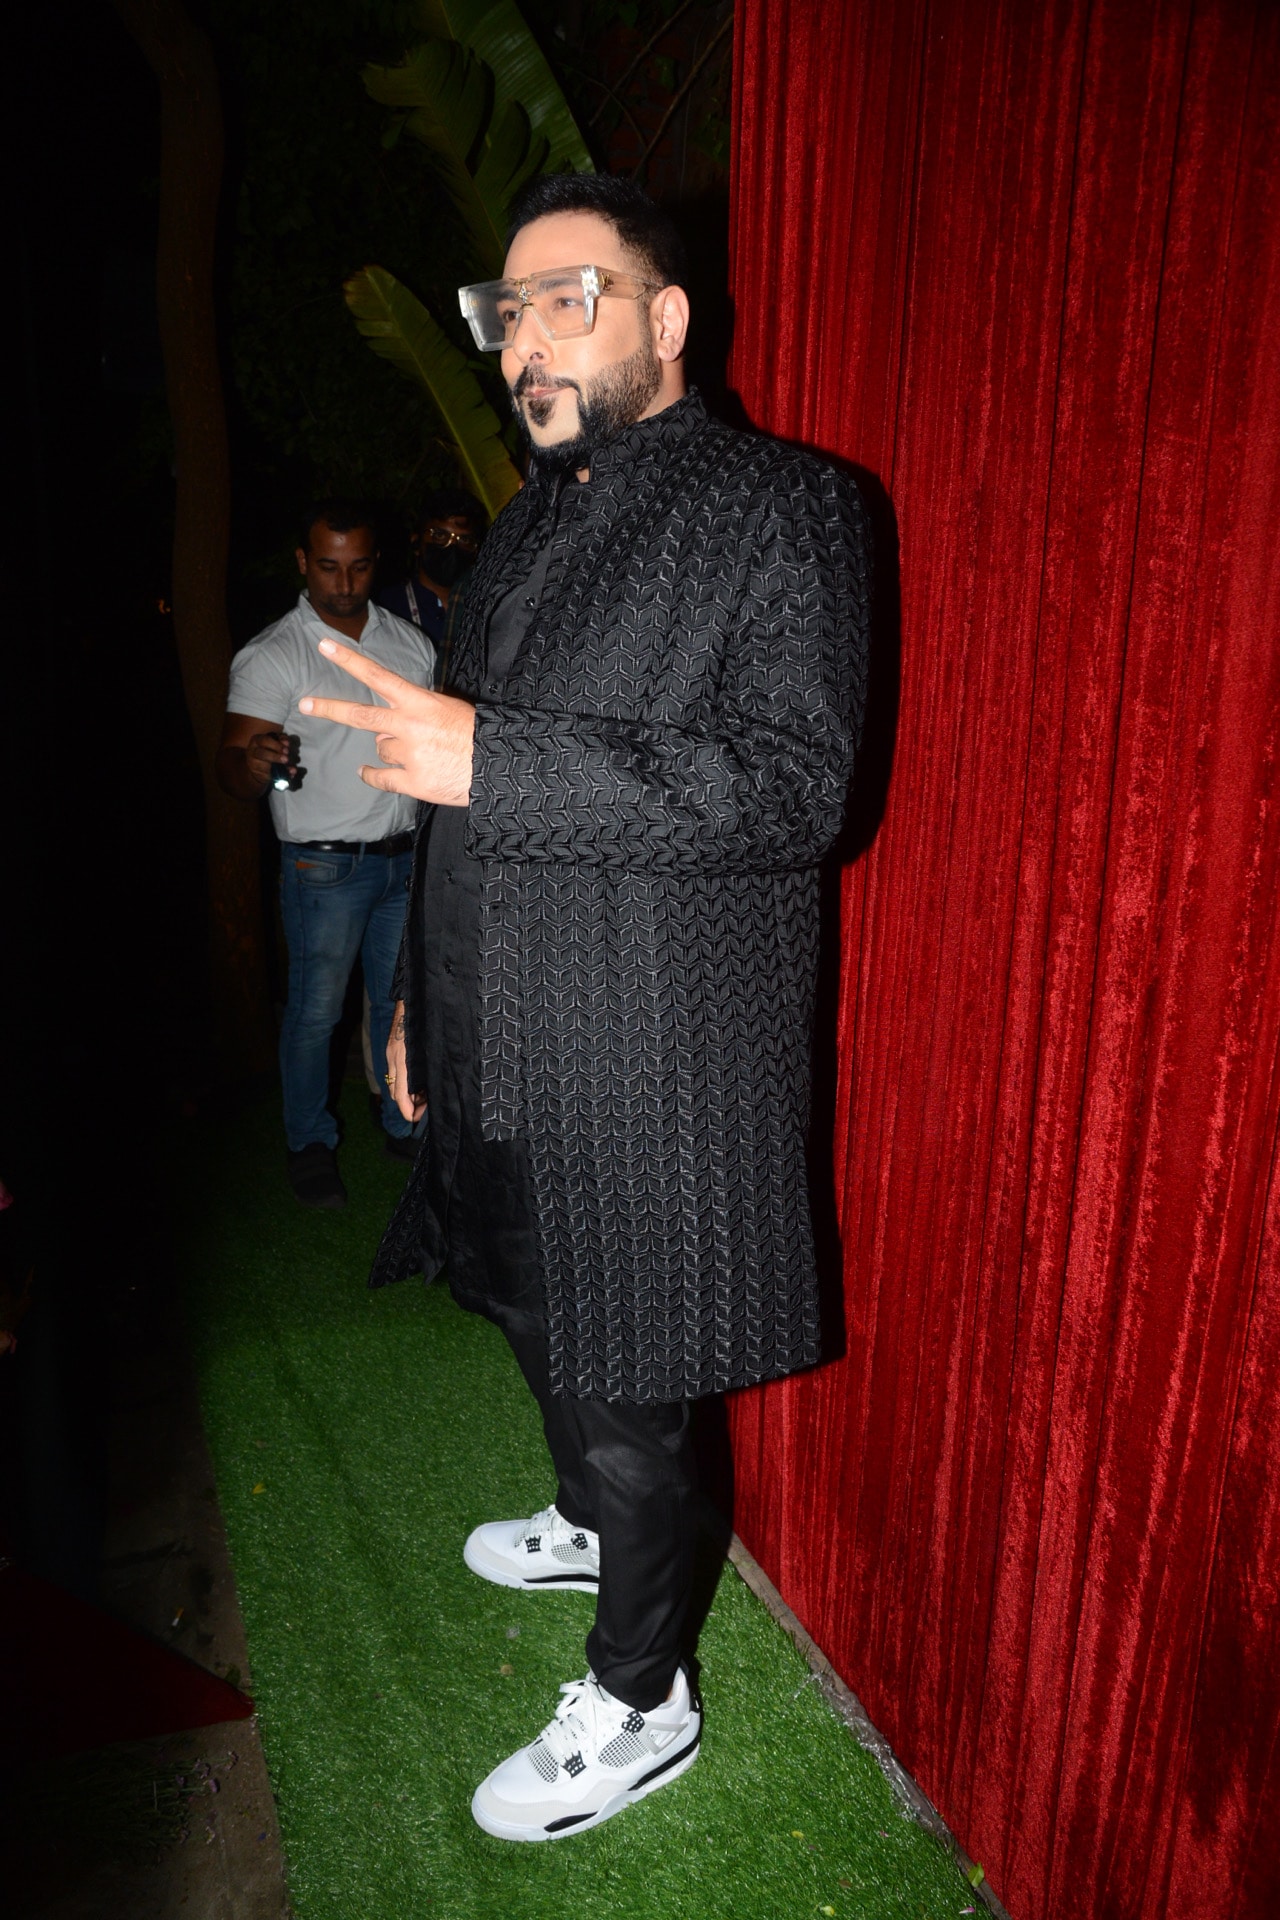 Singer and rapper Badshah arrived in a style too,. (Photo: Viral Bhayani)